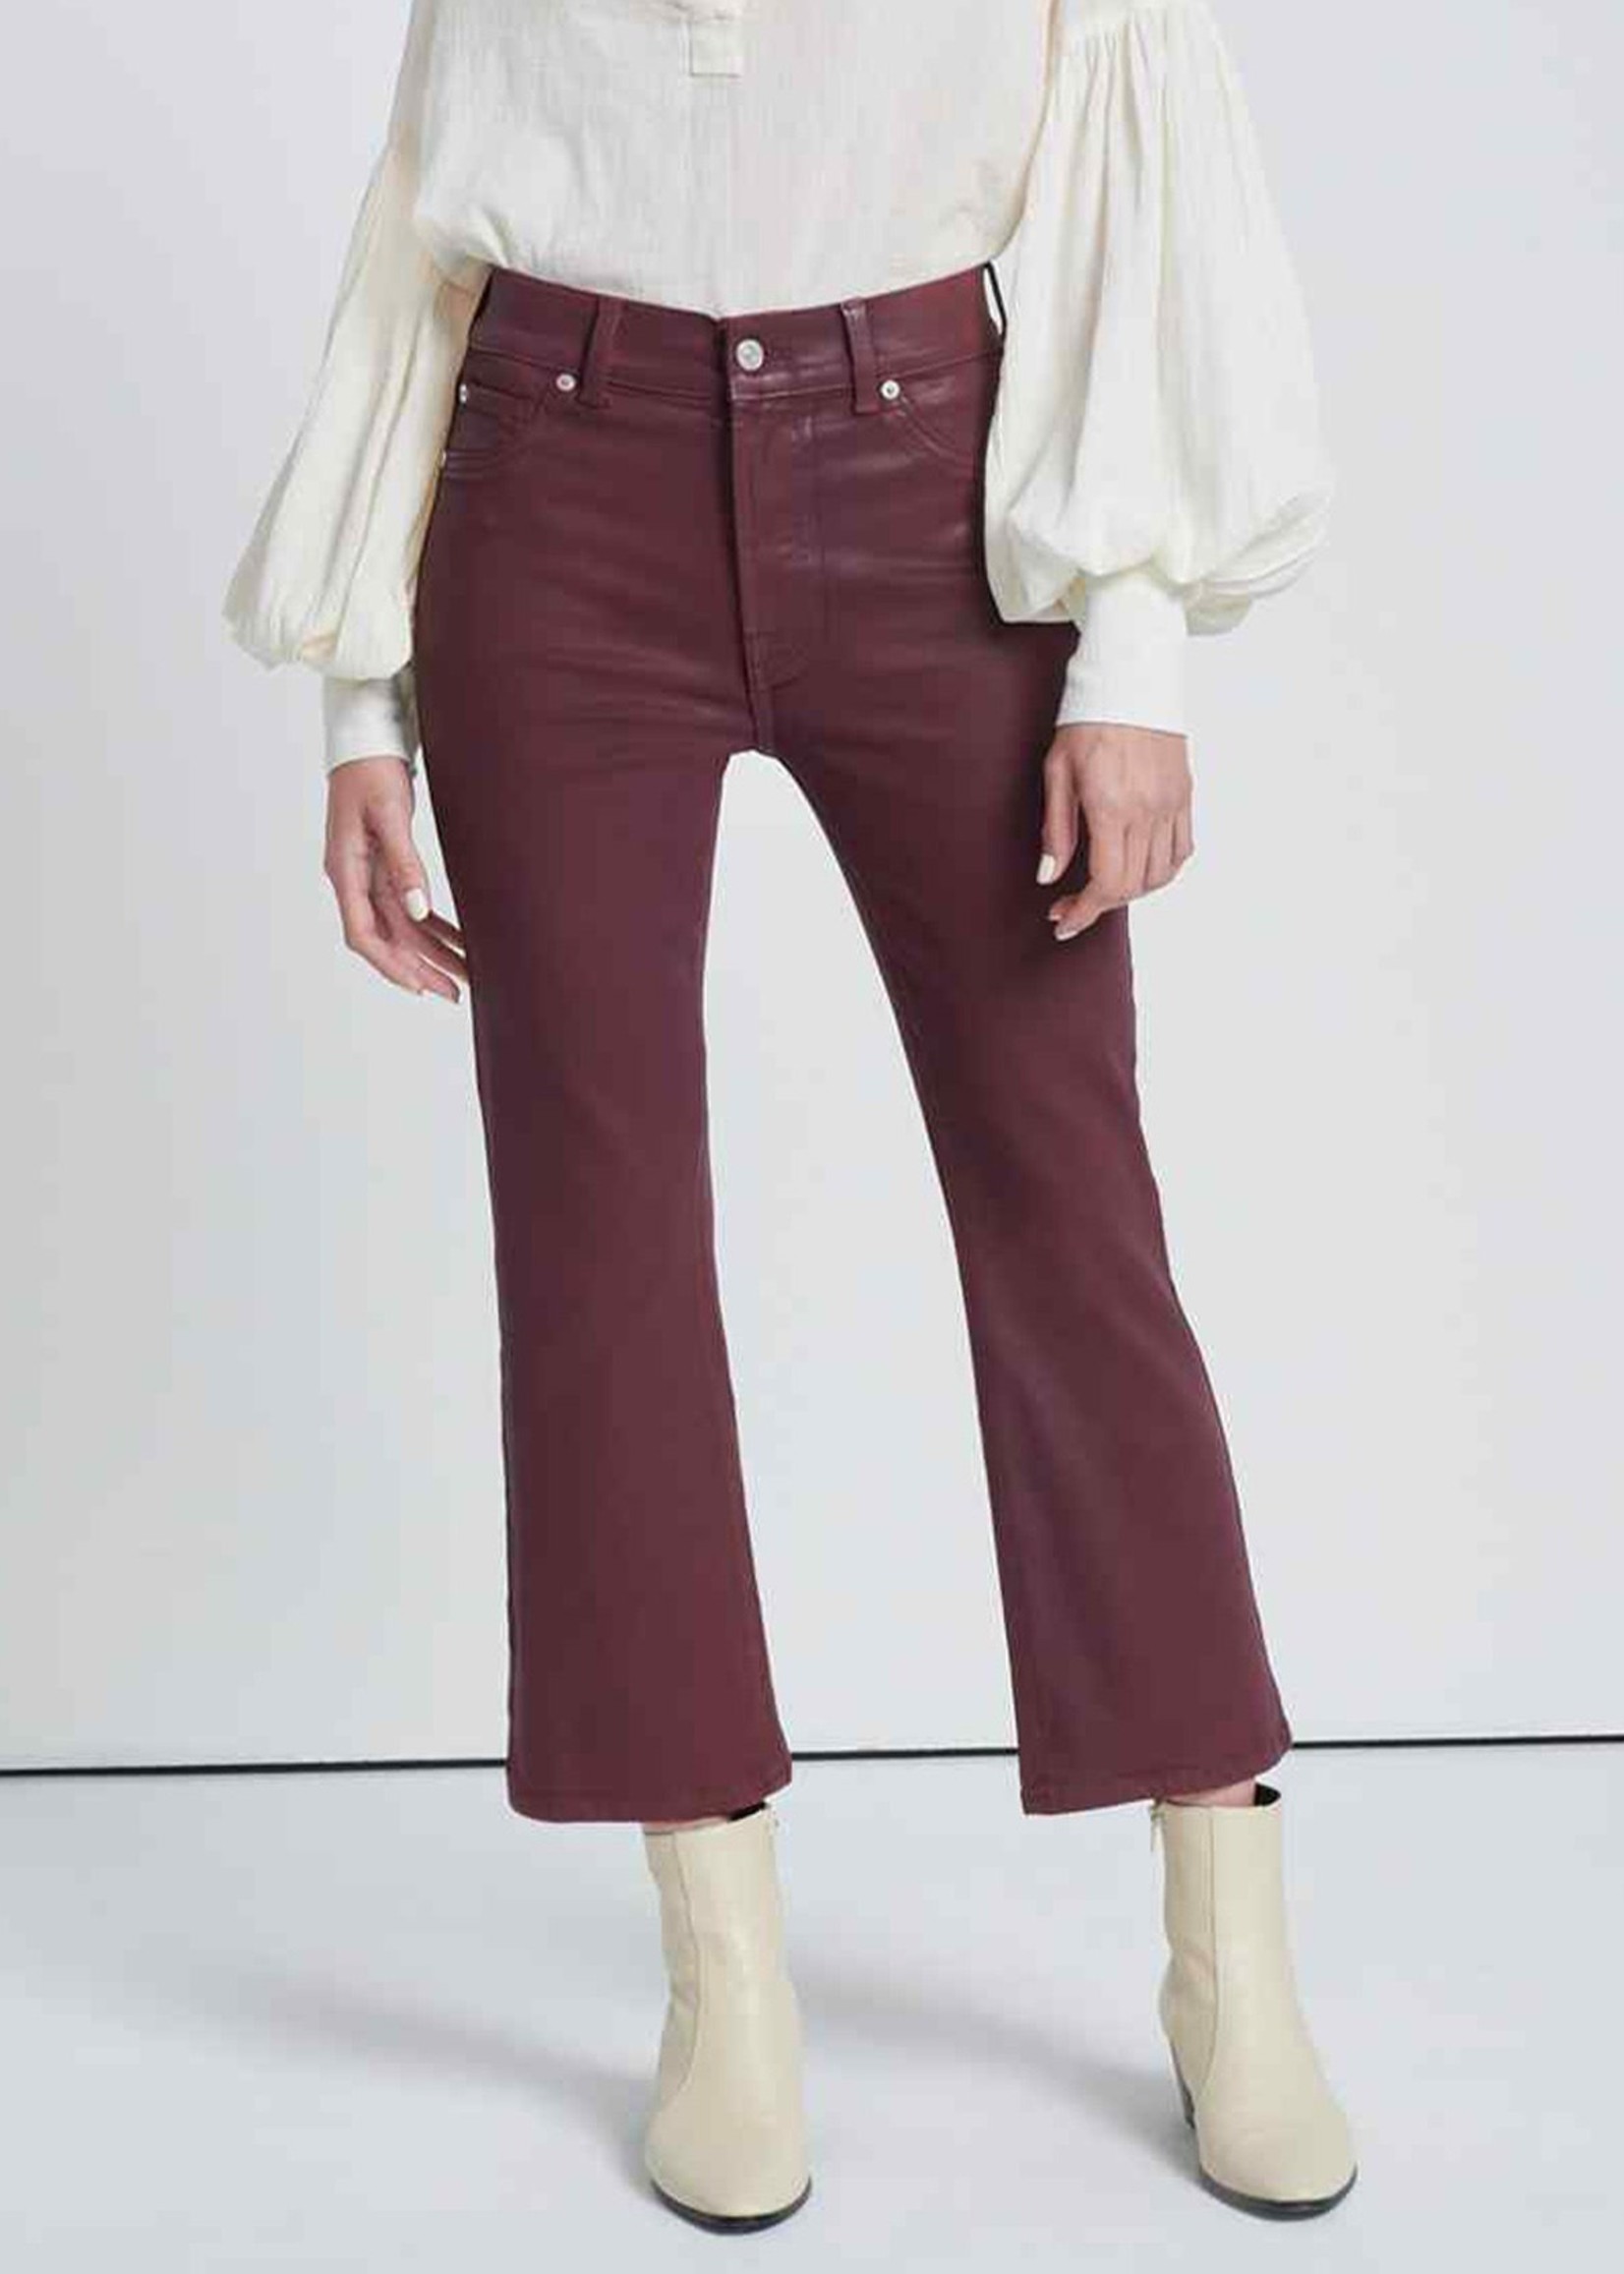 7 For All Mankind 7 For All Mankind The High Waist Slim Kick in Coated Ruby Rust